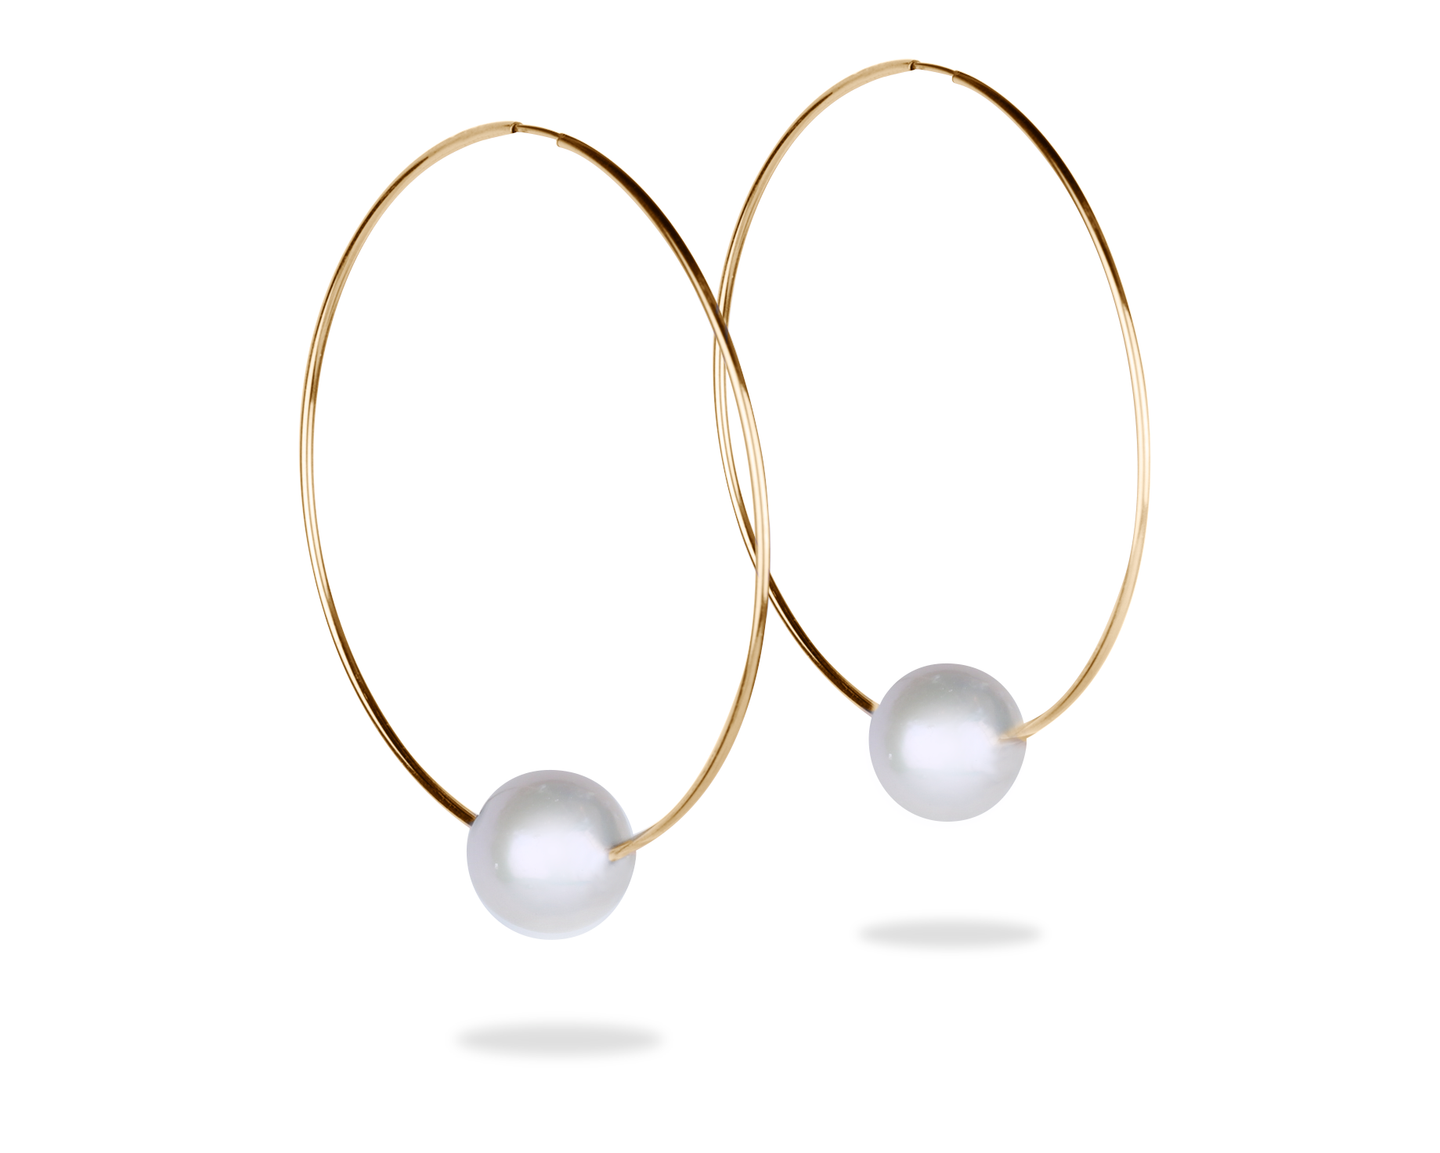 gold hoop earrings with freshwater pearl by Vincent Peach Fine jewelry